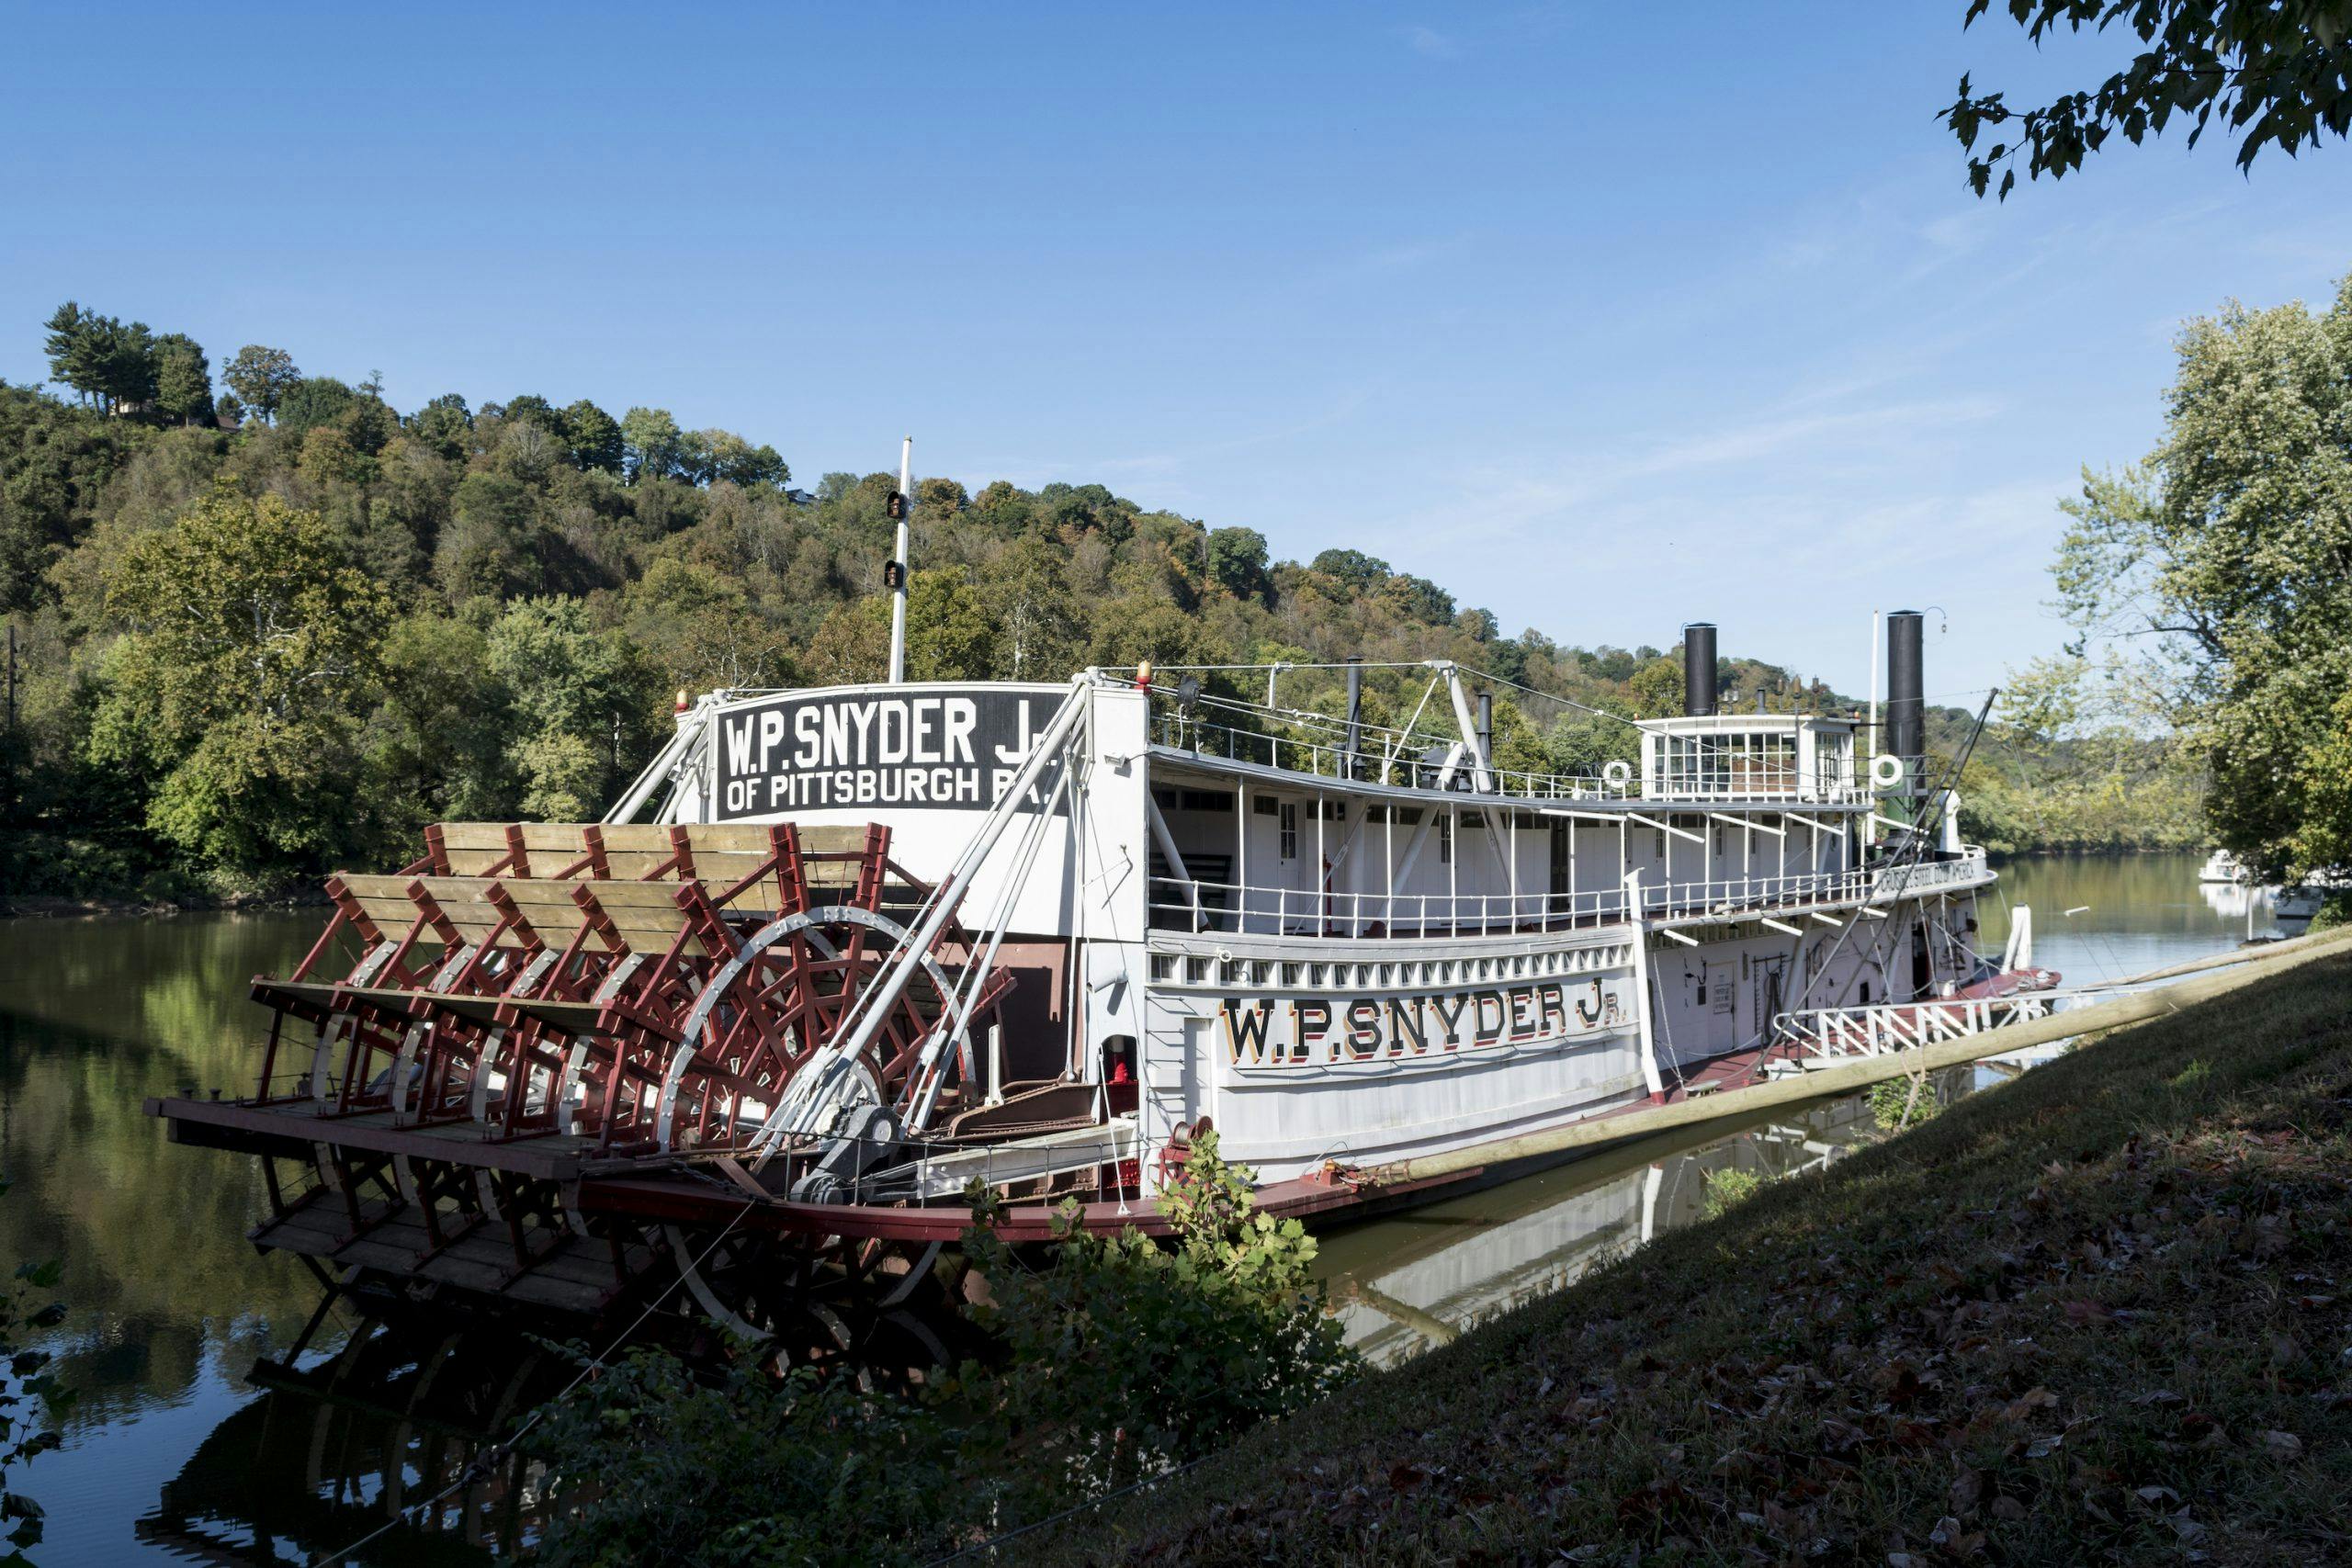 WP Snyder Steam Powered Ohio River Boat